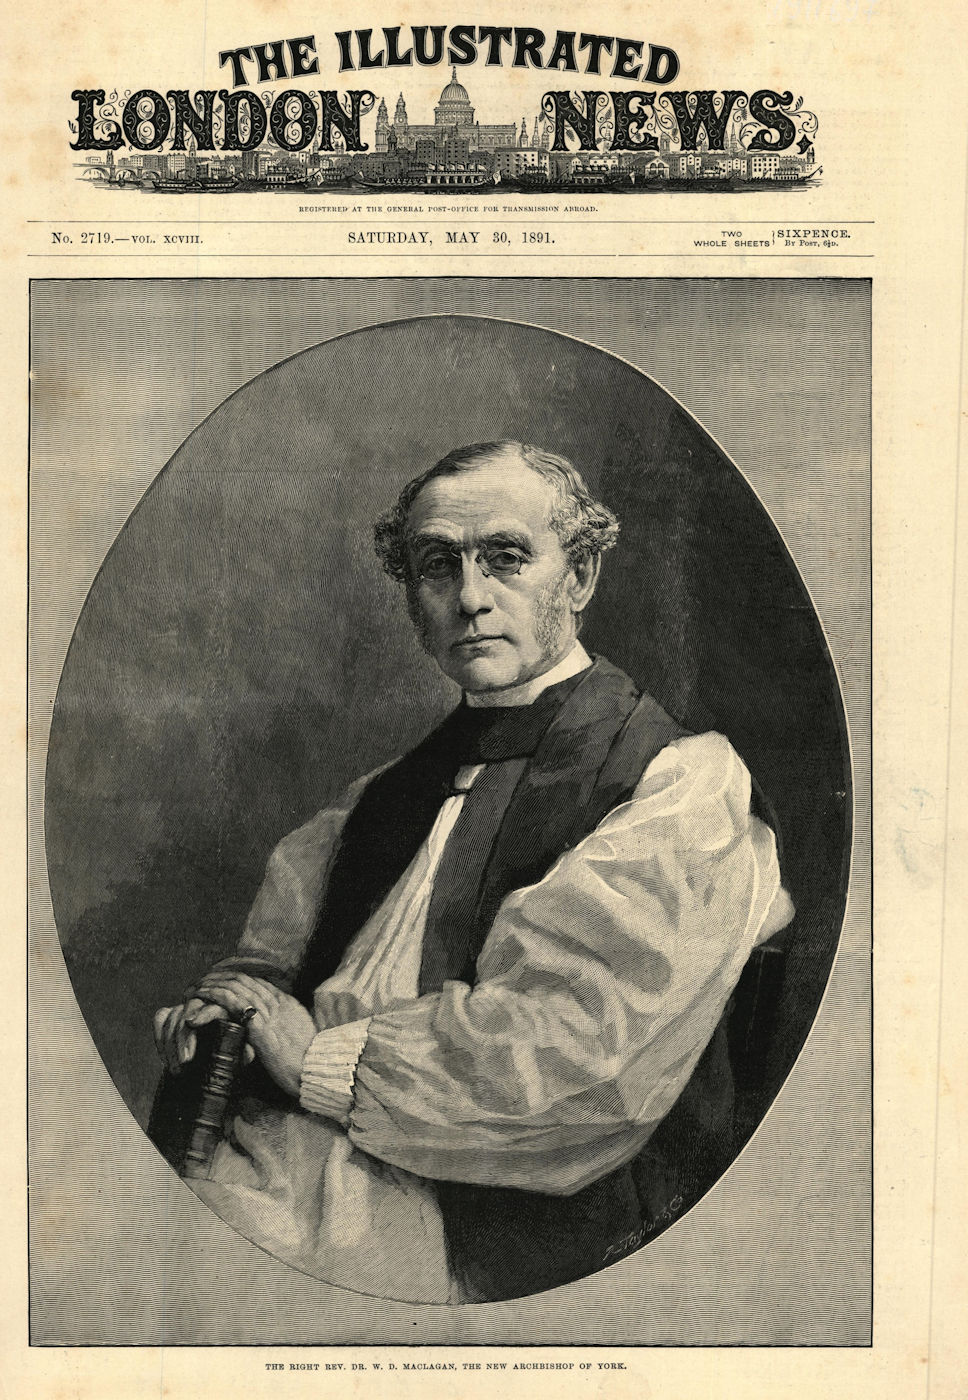 The Right Rev. Dr. W. D. Maclagan, the new Archbishop of York. Clergy 1891